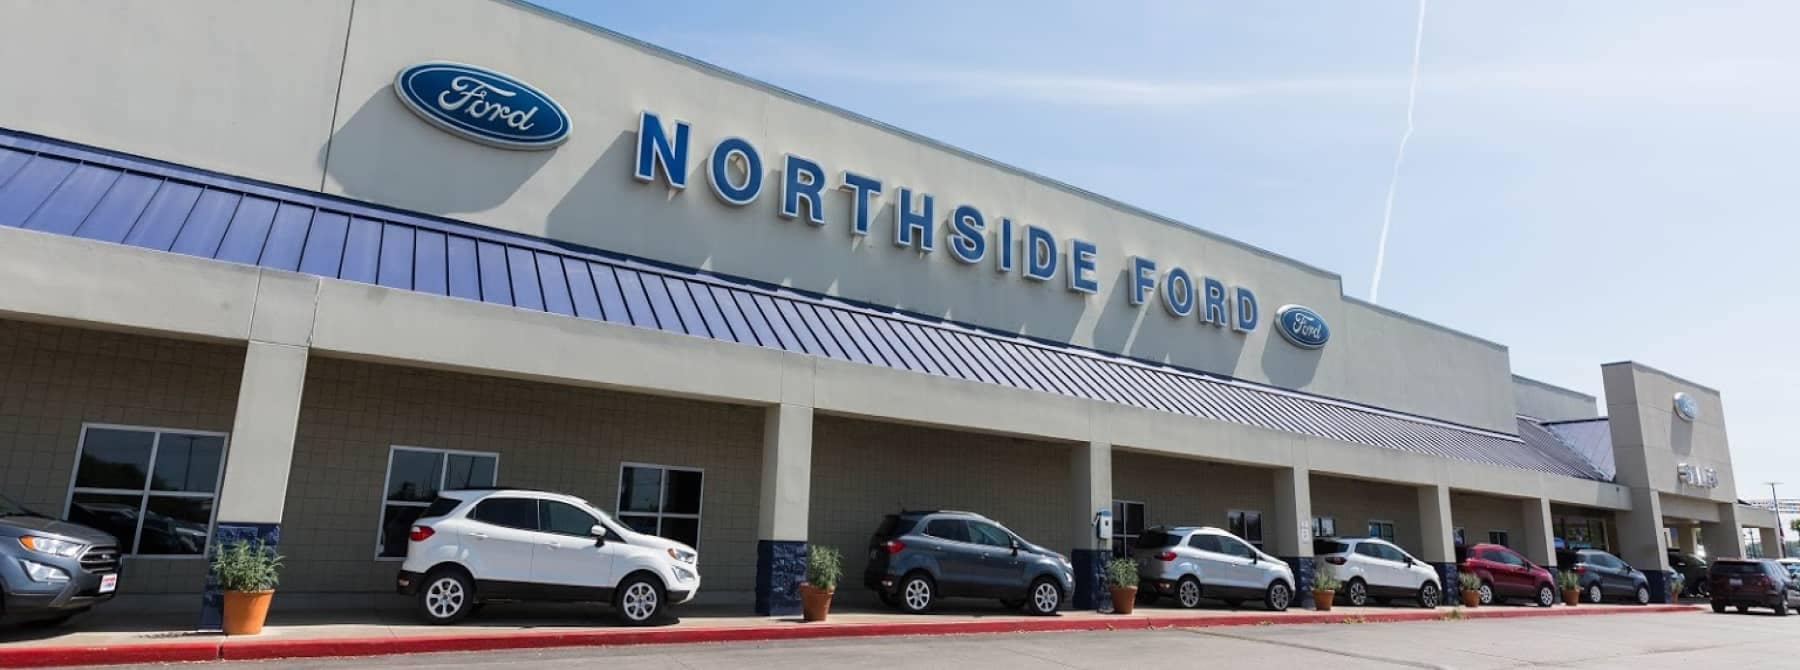 Northside Ford store front